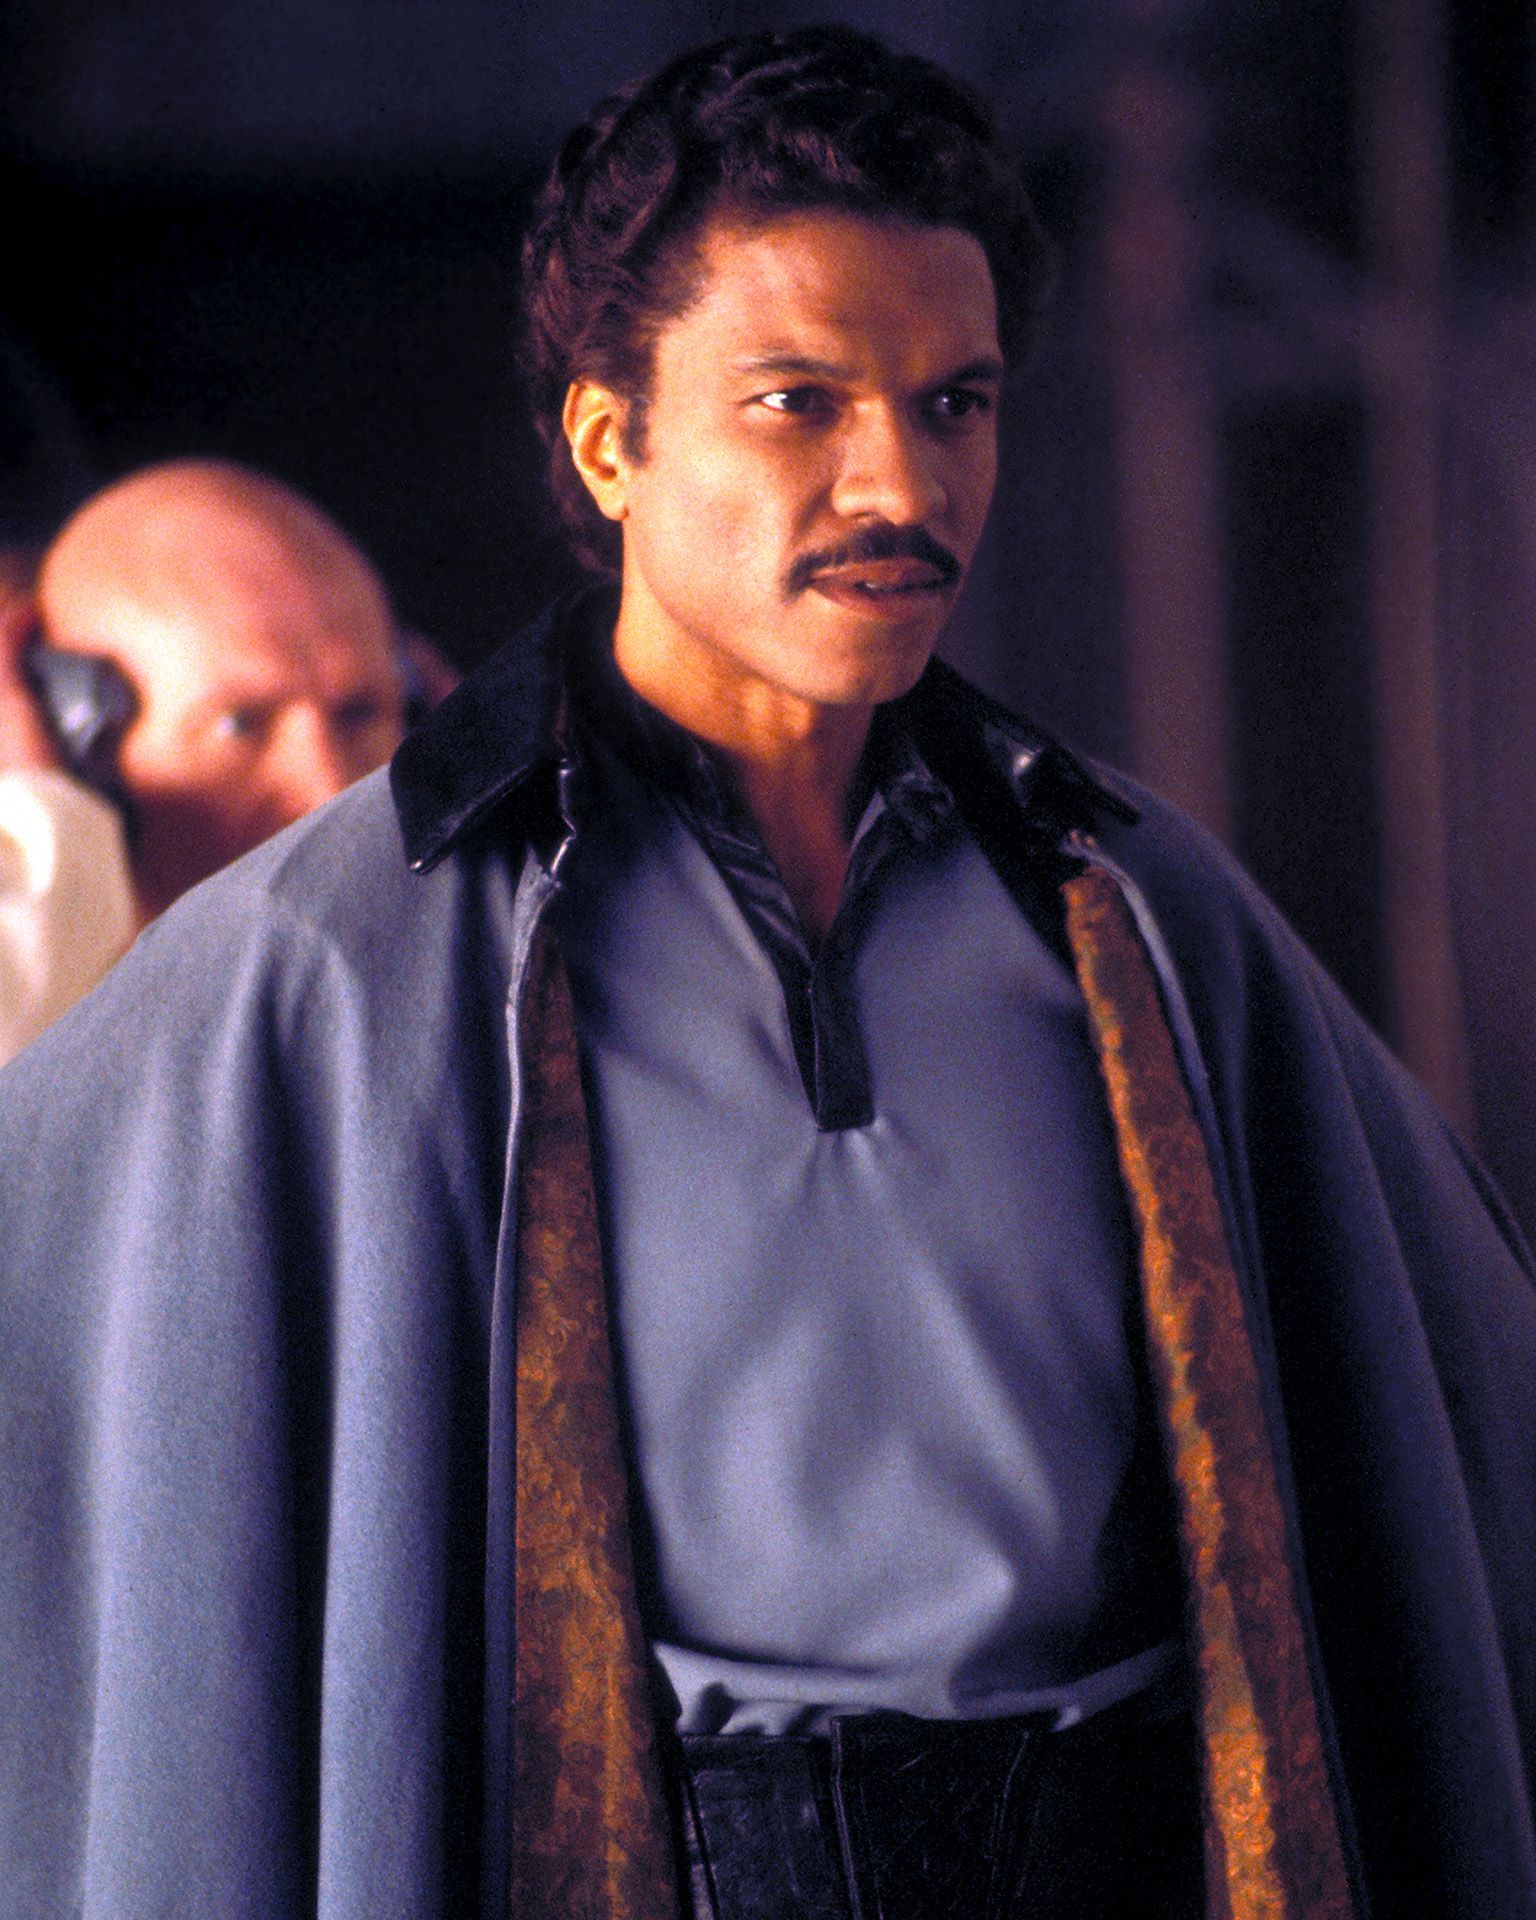 Billy Dee Williams Says Pronoun Use Did Not Mean 'Gender-Fluid